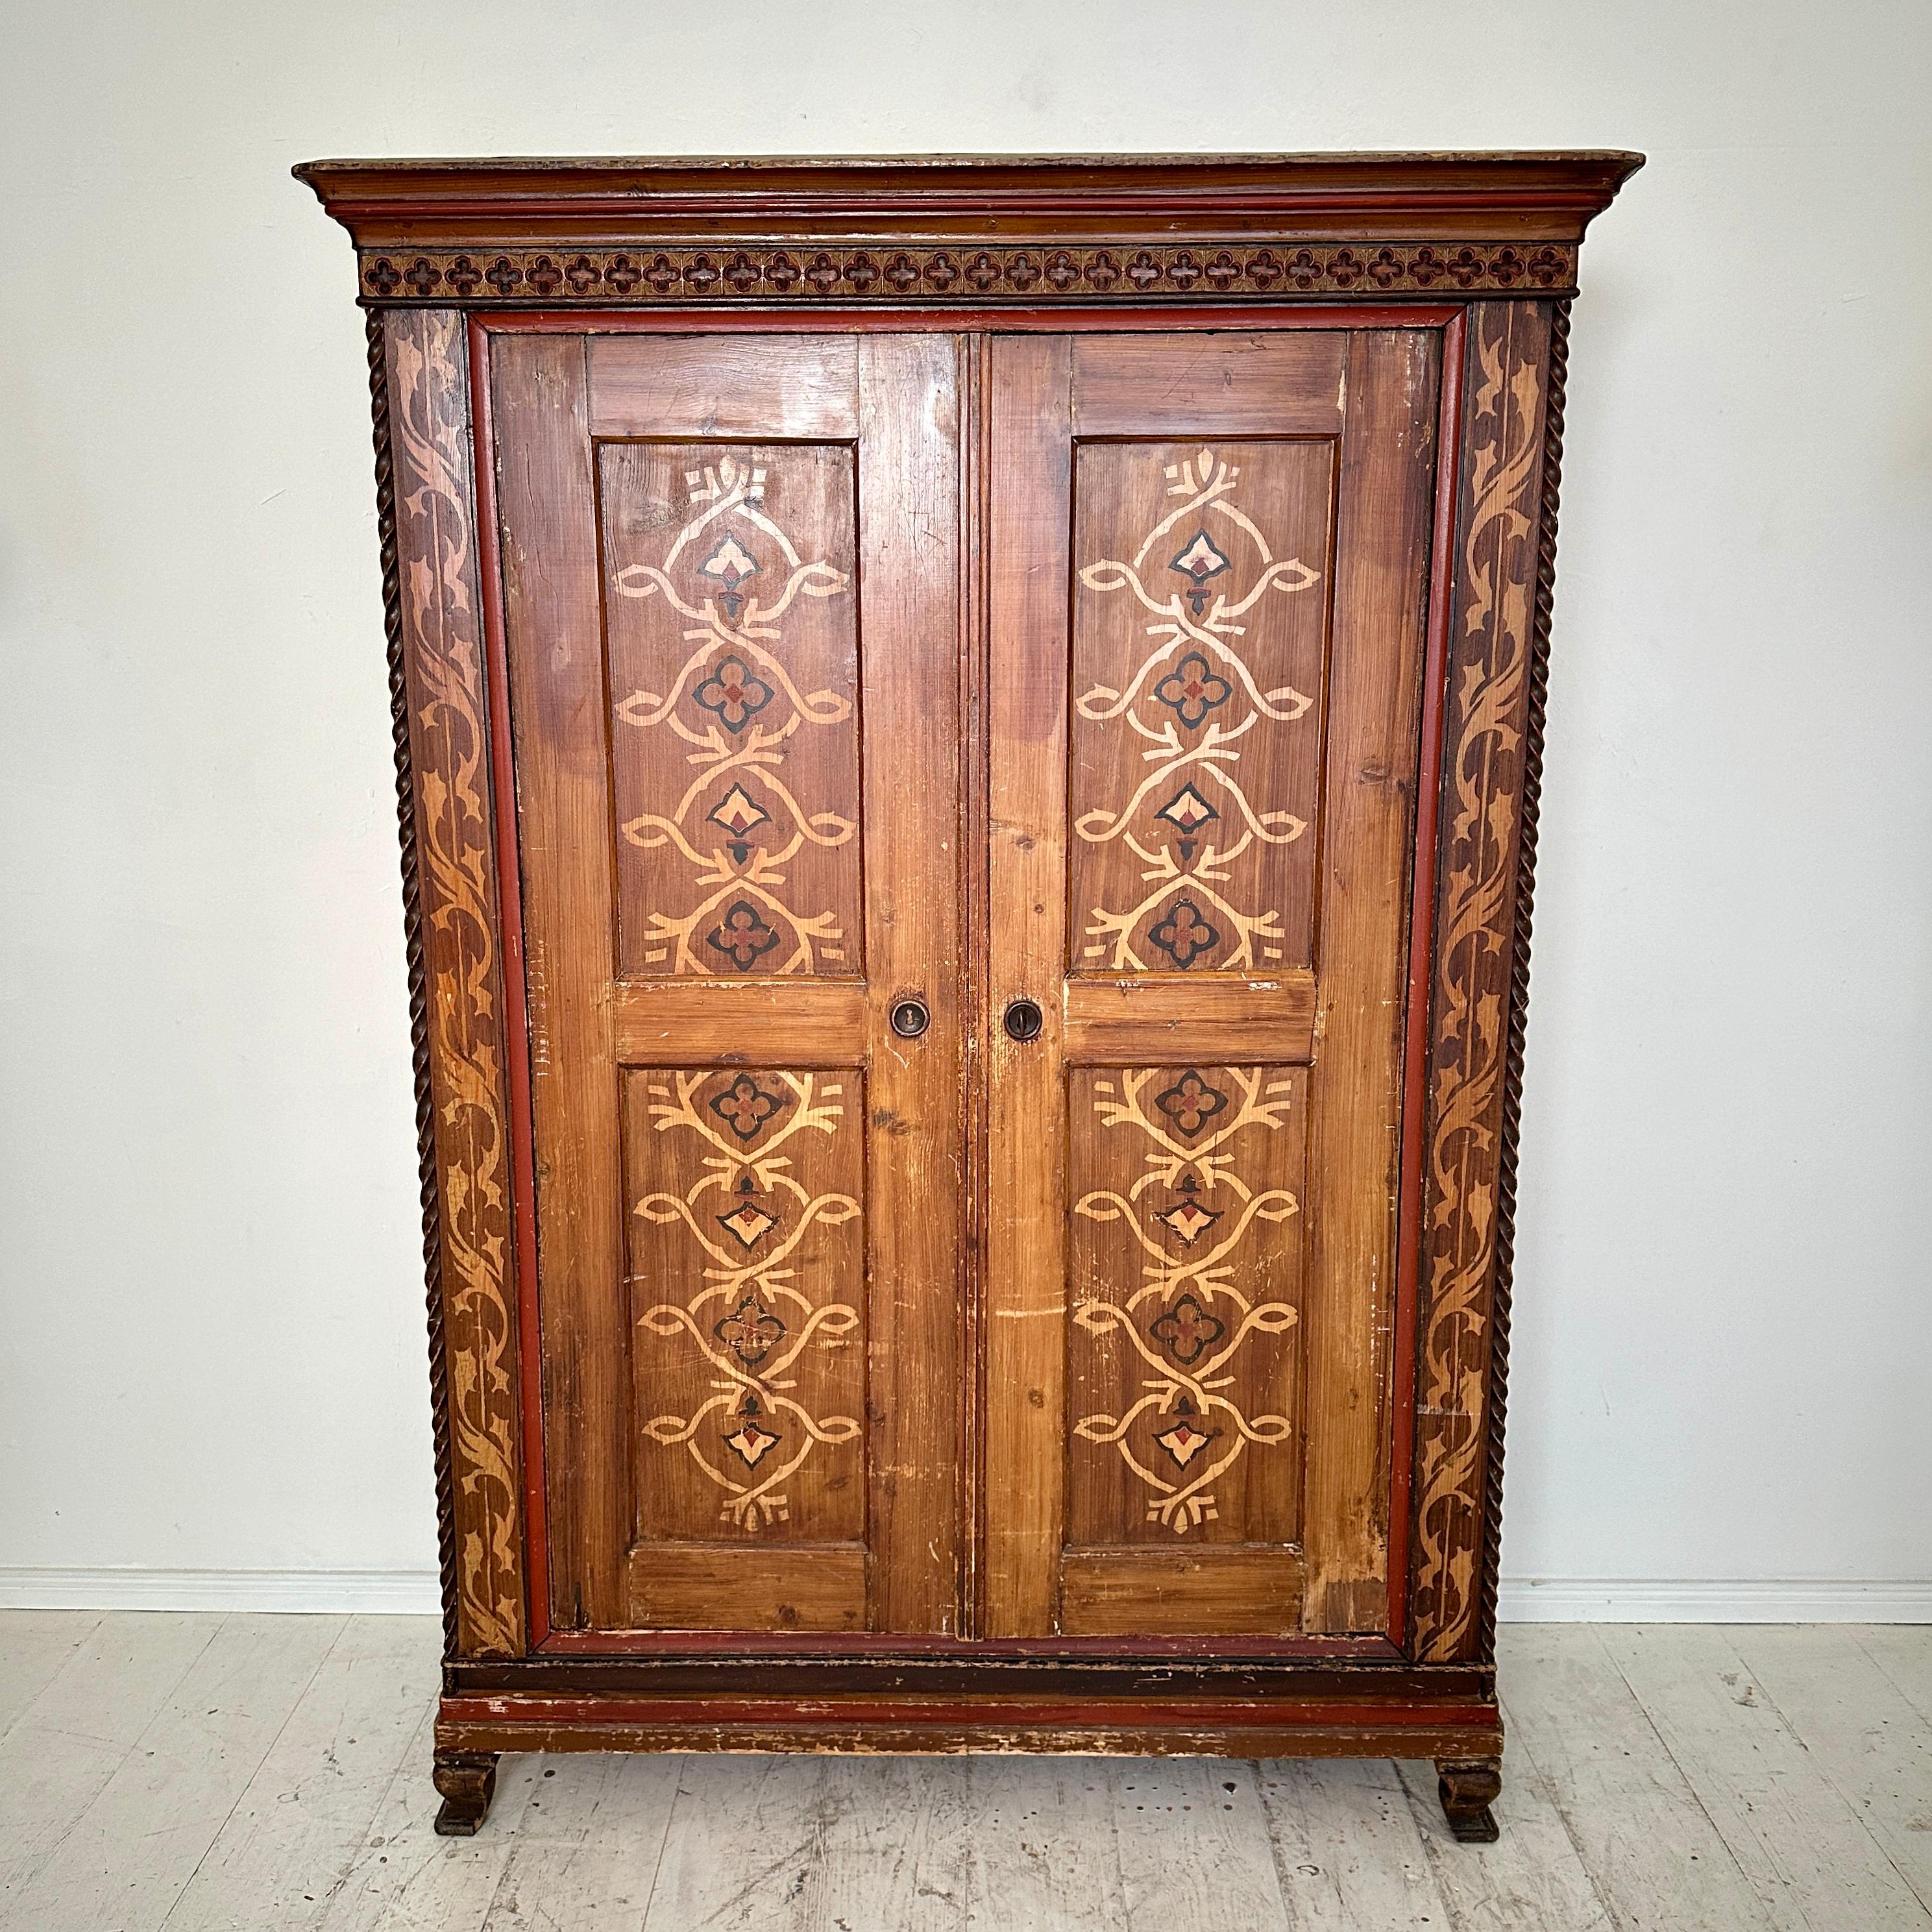 Immerse yourself in the intricate beauty of German craftsmanship with this stunning Neo-Gothic painted and carved cupboard, dating back to around 1870. Rich in history and artistry, this piece captures the essence of the Neo-Gothic movement,